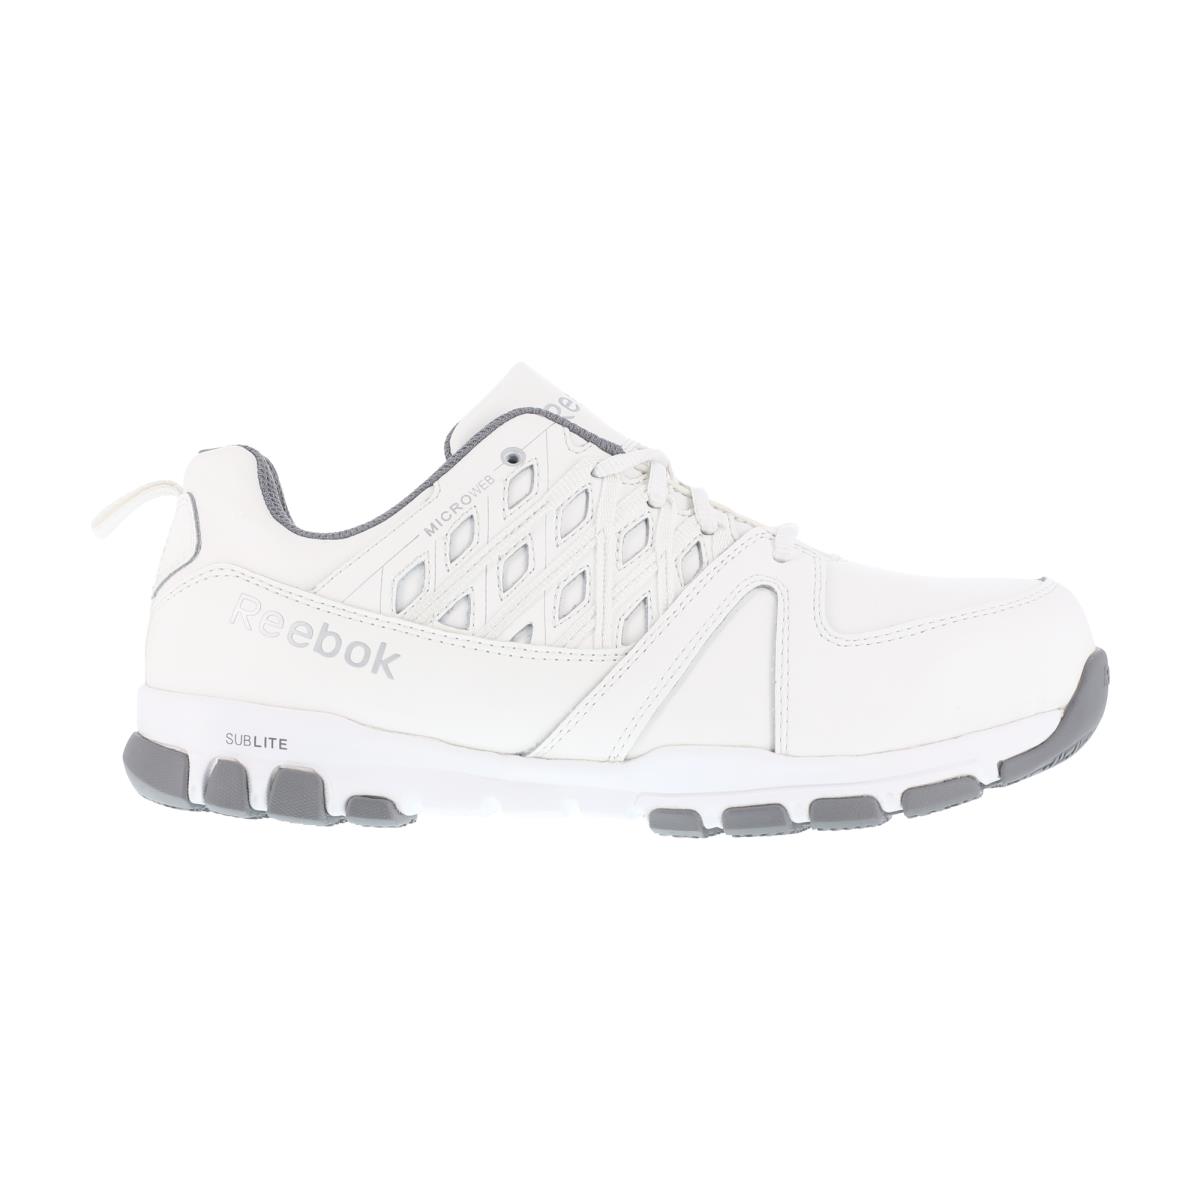 Reebok Womens White Leather Work Shoes ST Sublite Athletic M